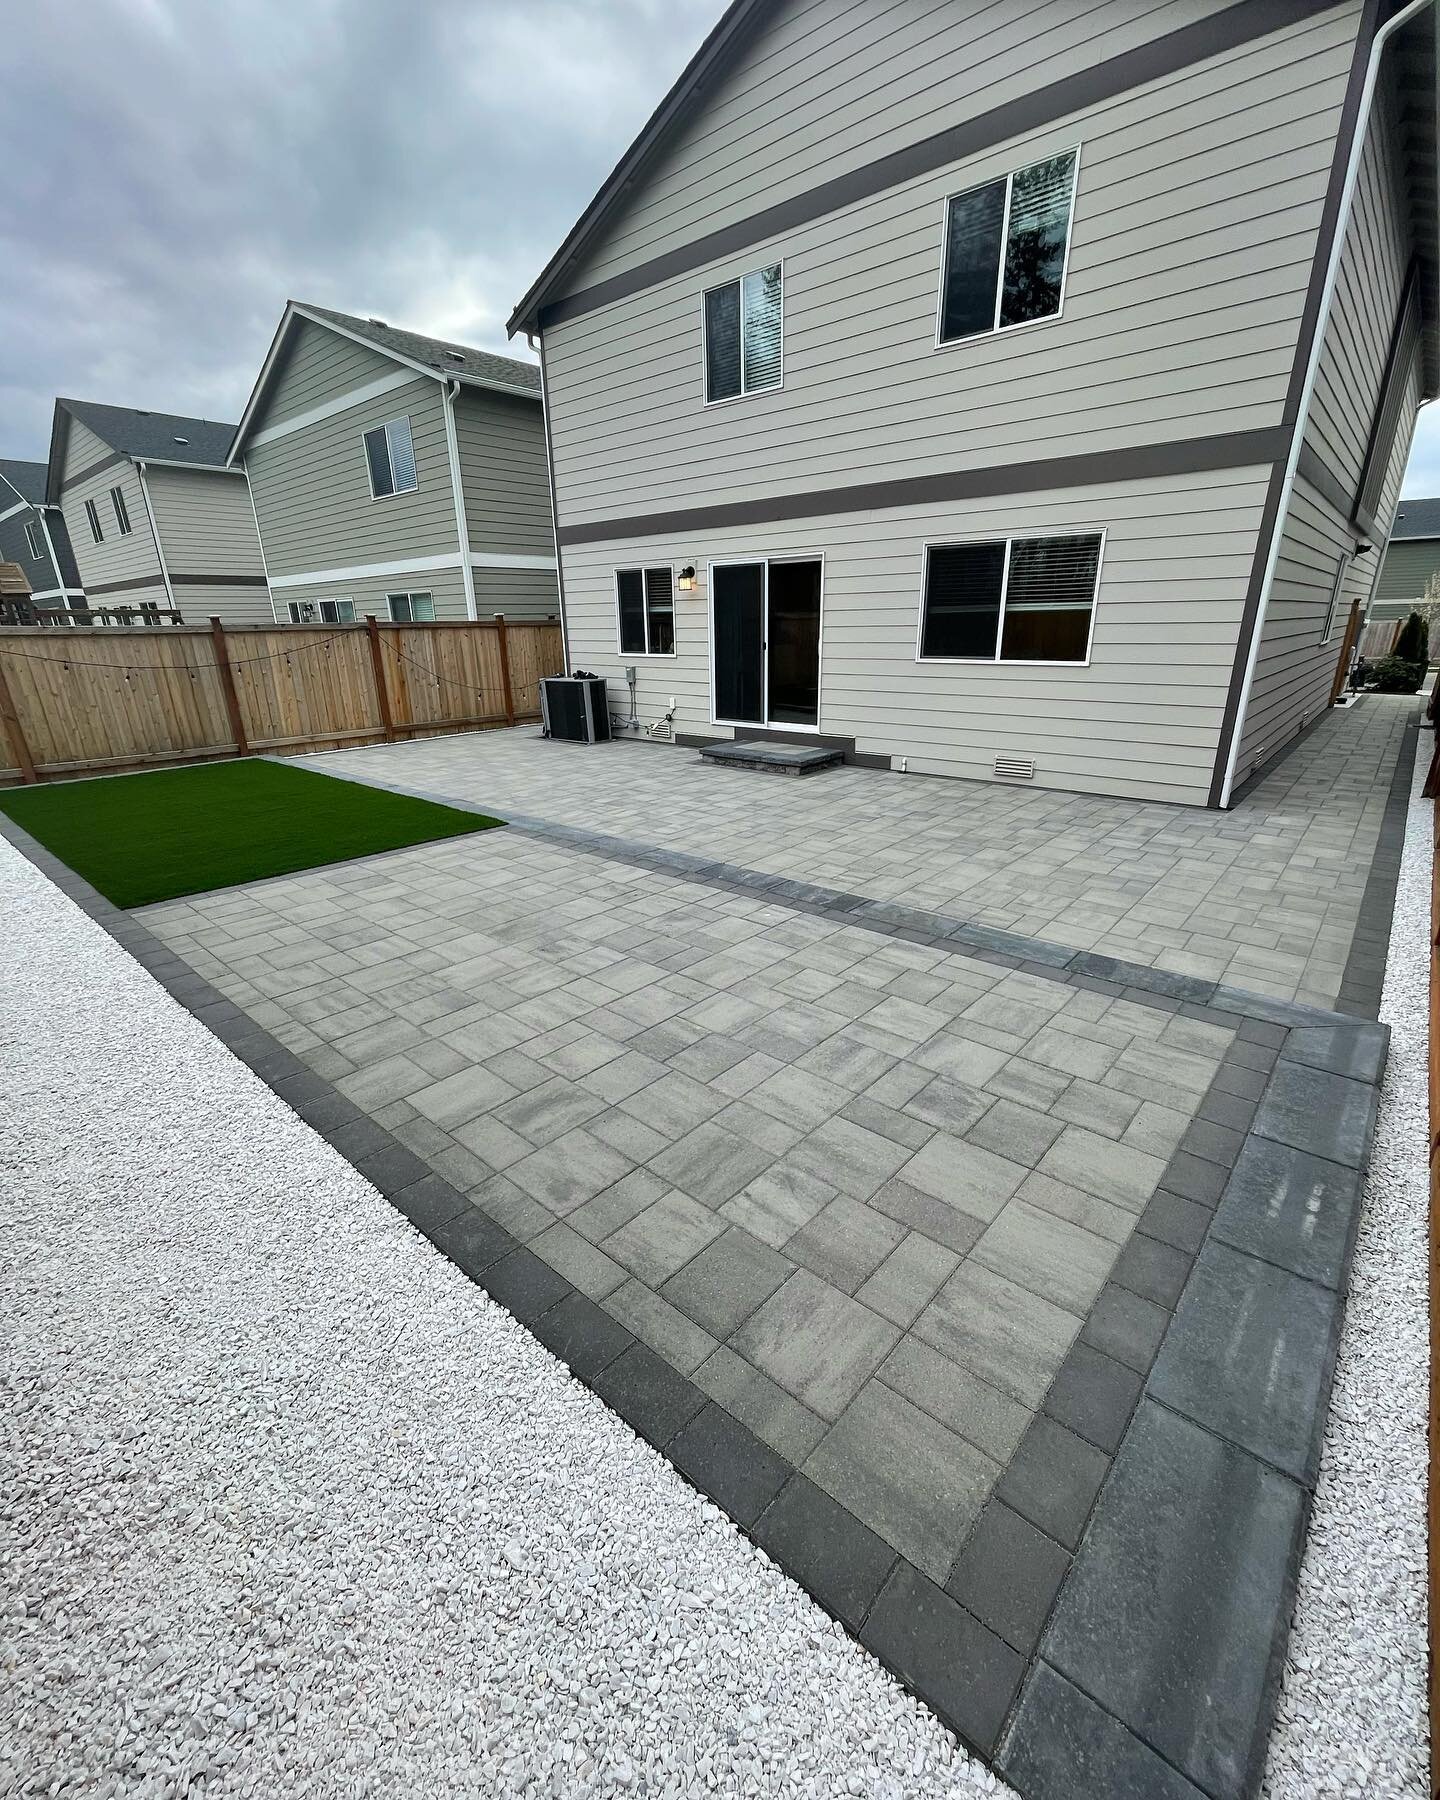 Pavers and Turf. A great combination to add to any backyard! 🔥 

Let us bring your backyard to life!

Send us a message or Call us today to get started!

💻 
www.lslandscapewa.com

☎️ 
(425) 236 5989

#pavers #paverpatio #outdoorpatio #outdoorliving